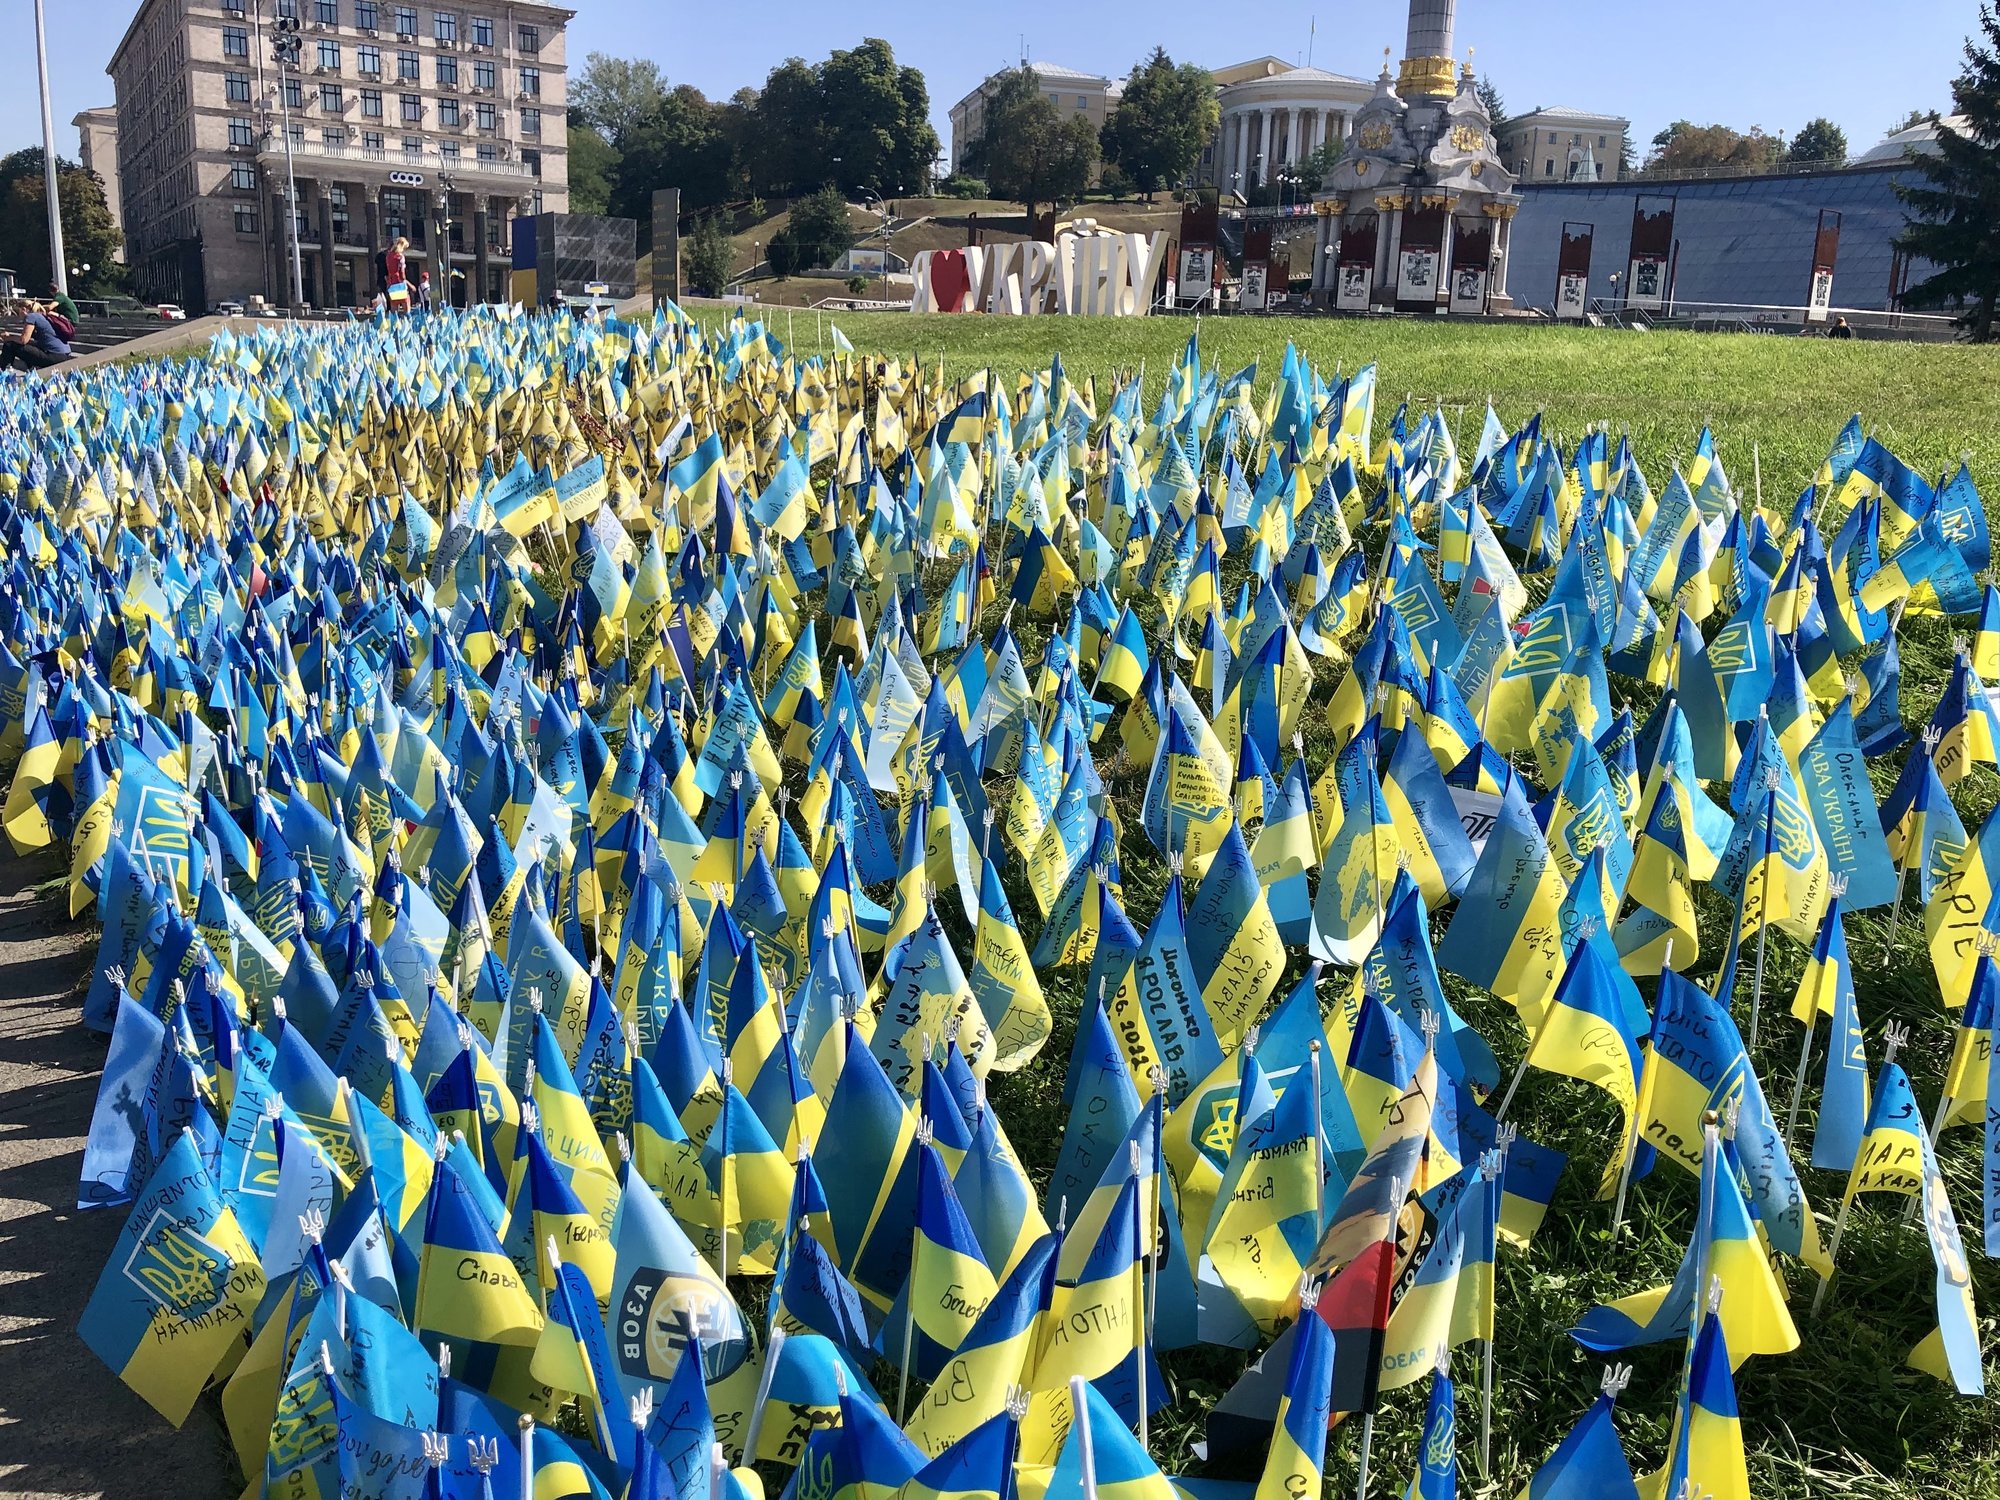 A display on Kyiv’s central square, the Maidan, on Ukraine’s Independence Day, Aug. 24, 2022. Photo by Nolan Peterson/Coffee or Die Magazine.